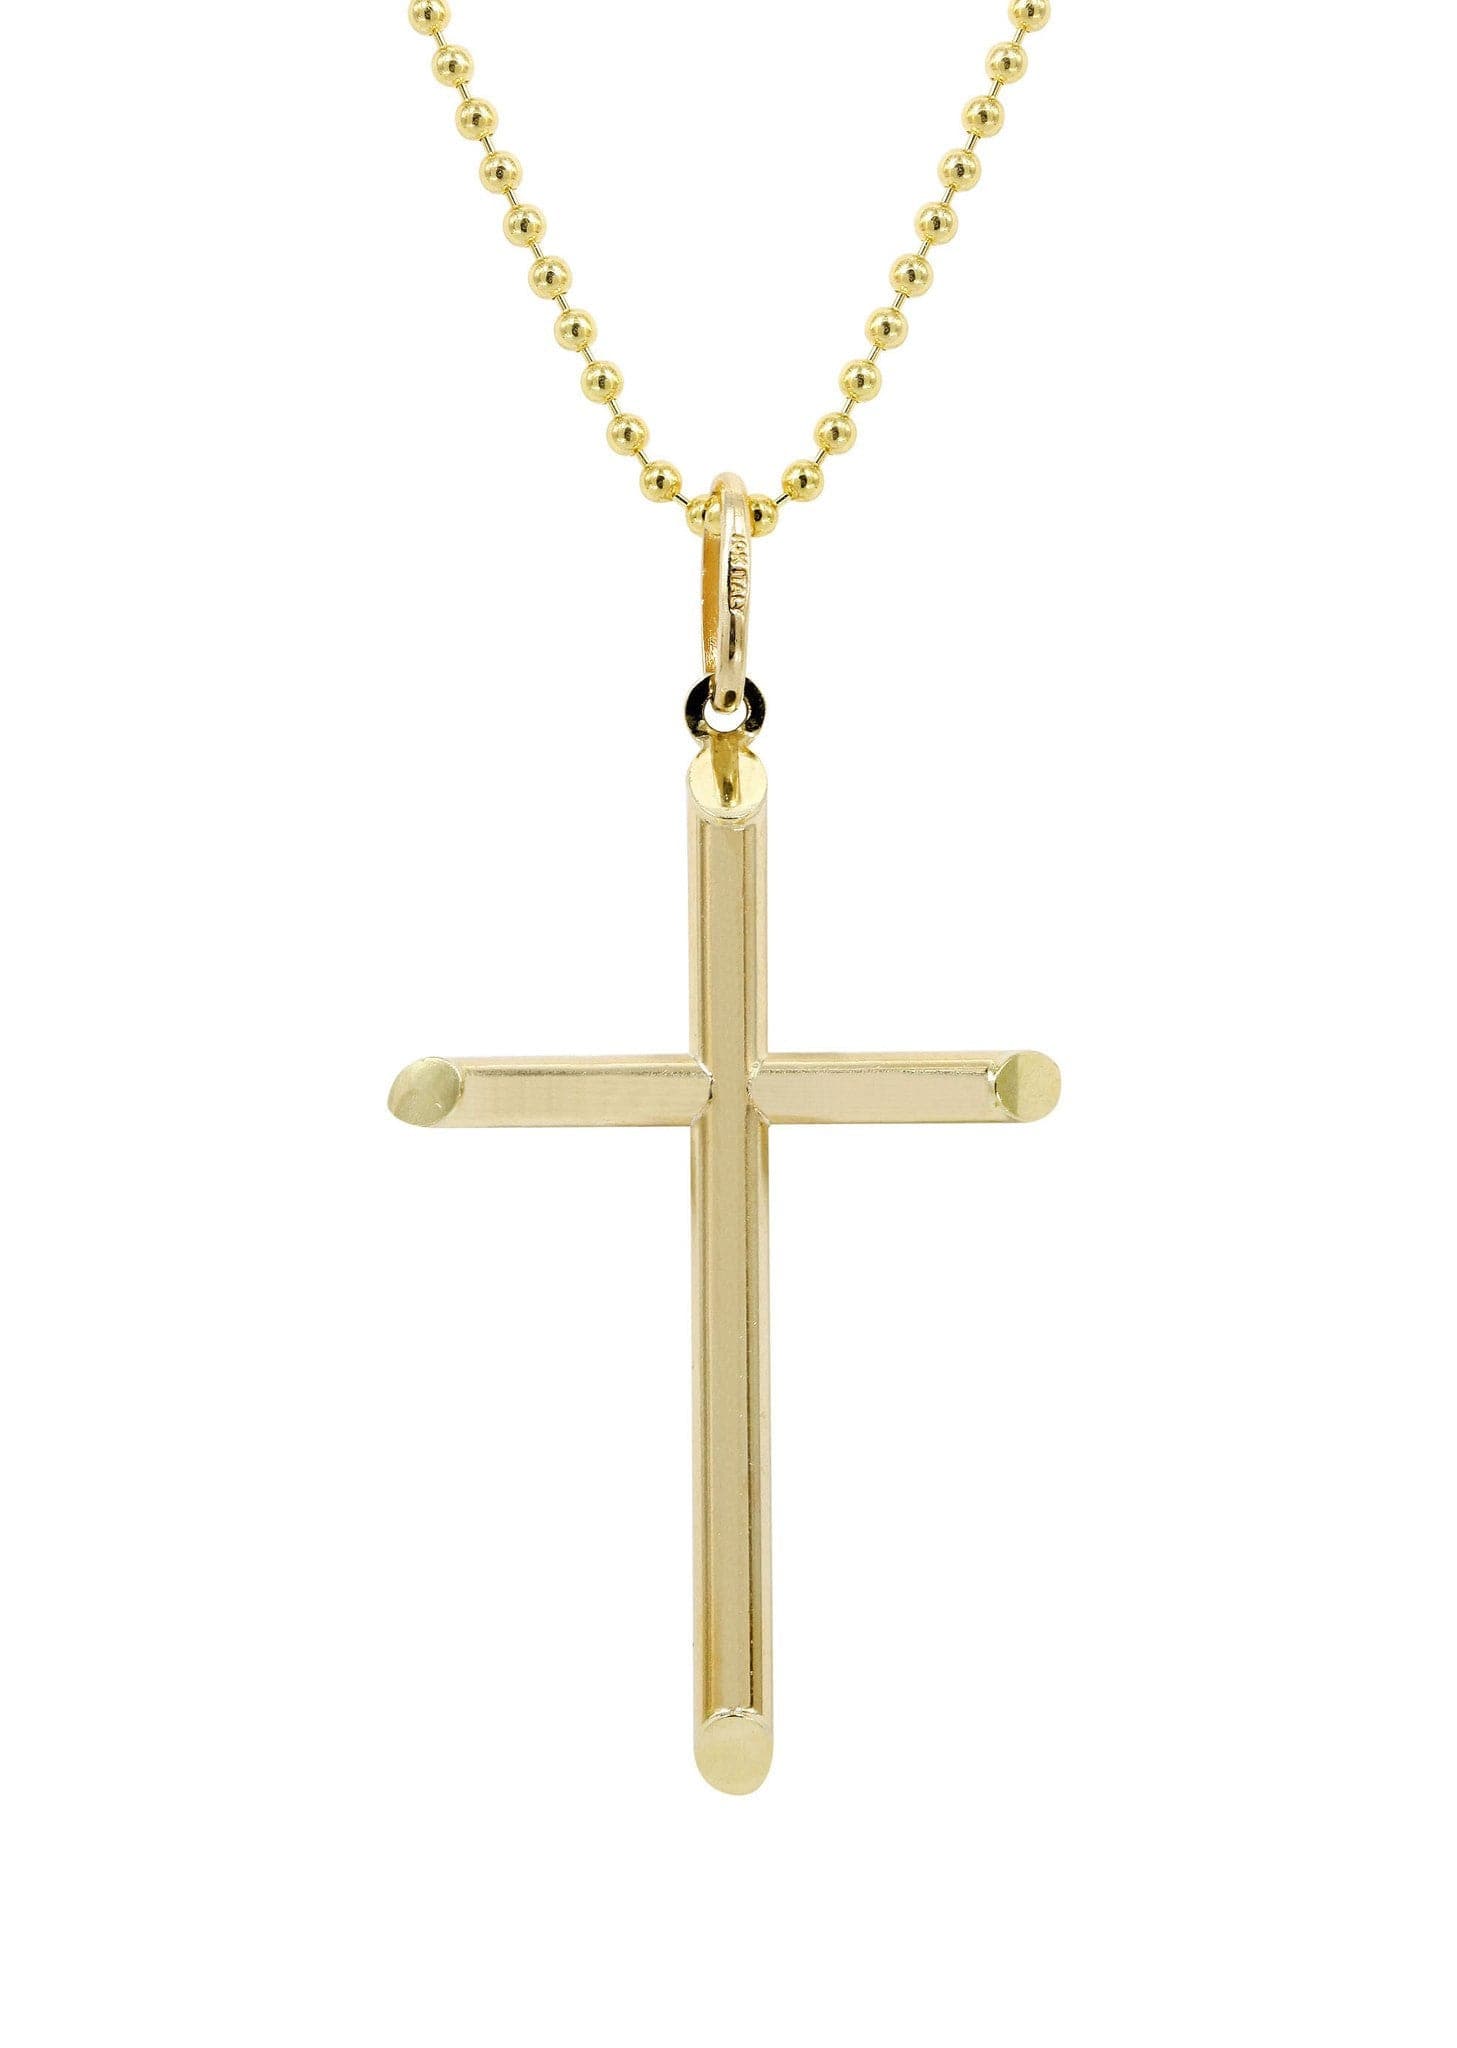 10K Yellow Gold Dog Tag Chain & Gold Cross Necklace | Appx. 8.6 Grams ...